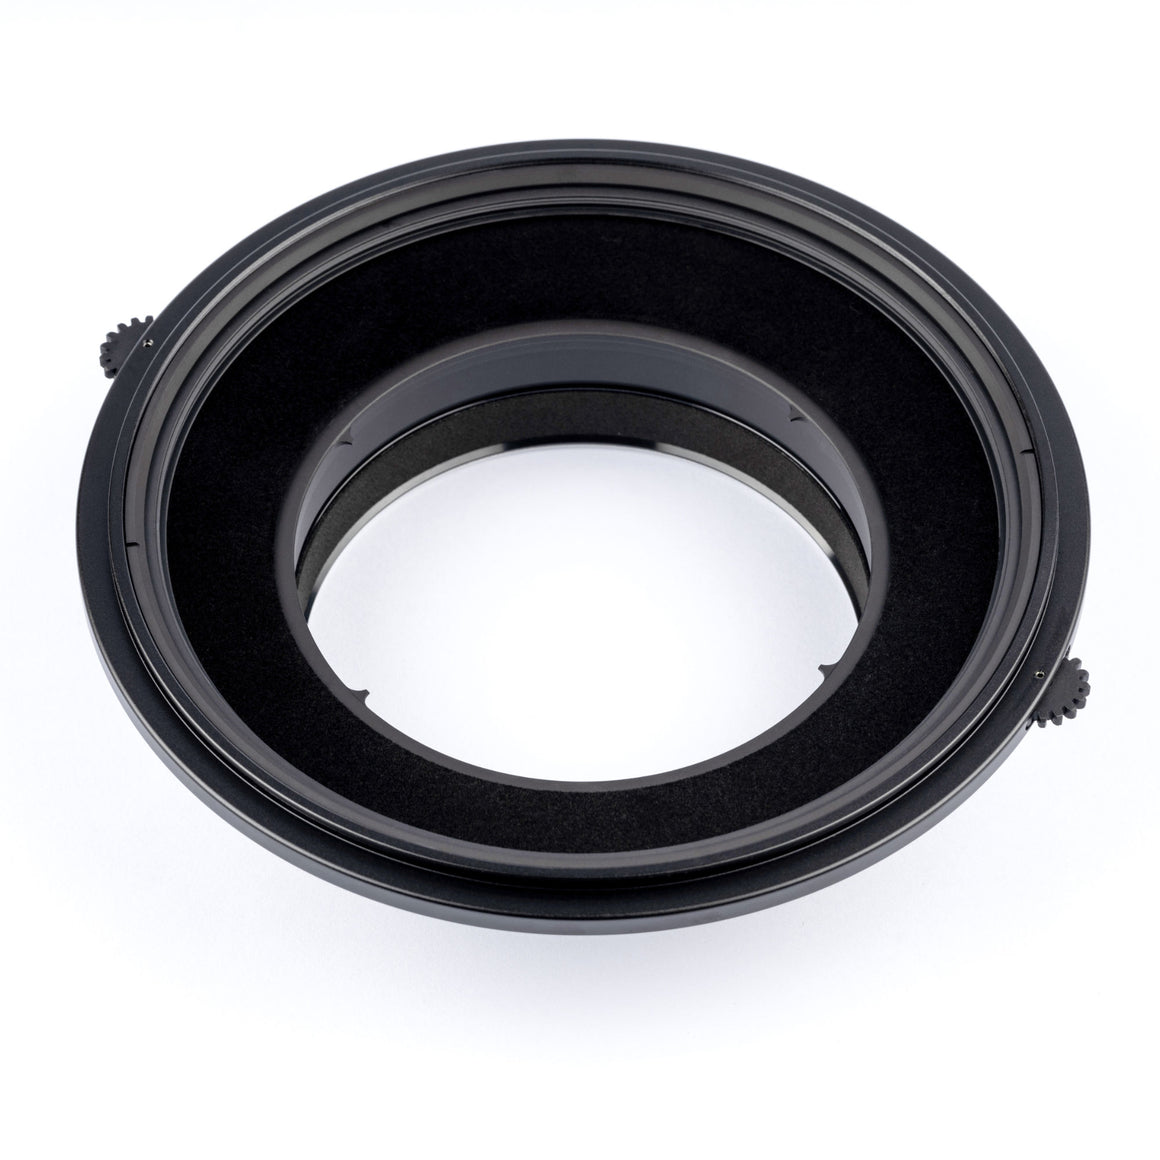 nisi-s6-150mm-filter-holder-adapter-ring-for-sony-fe-14mm-f-1-8-gm